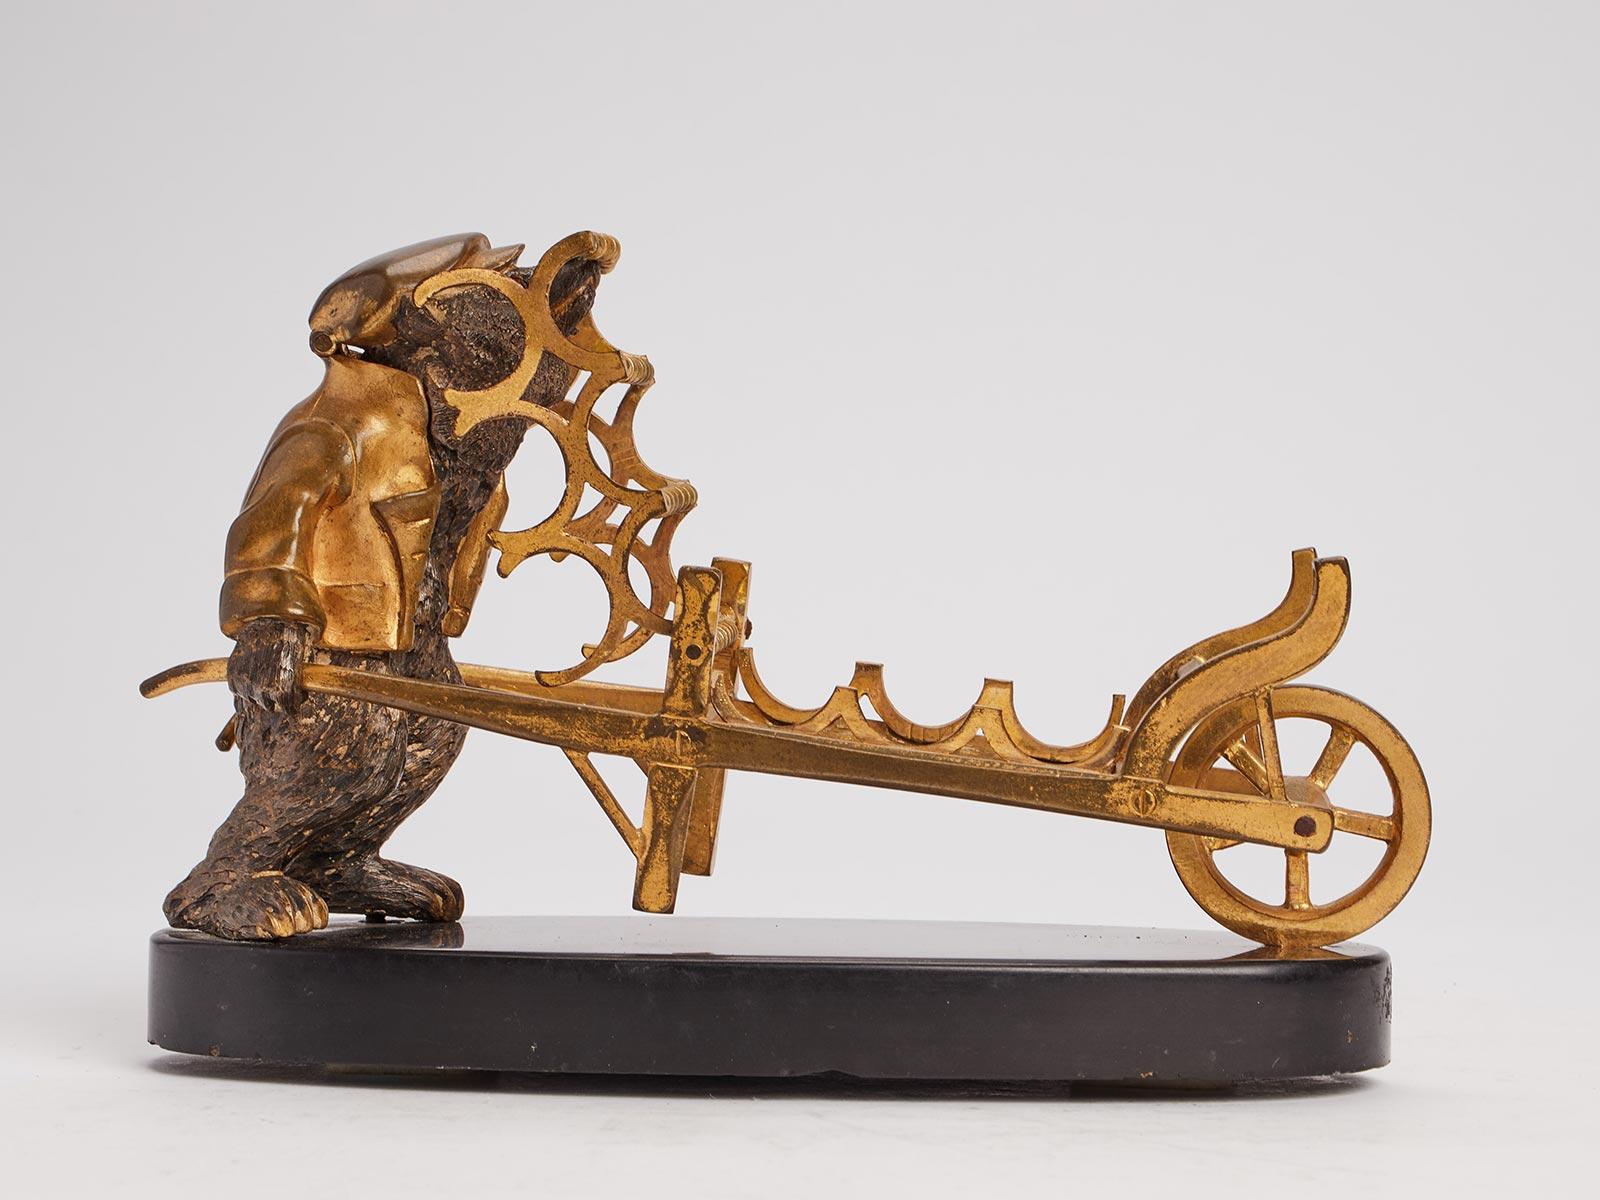 Inkwell and fountain pens holder, silver and gold gilt bronze sculpture of a dressed bear, pushing a wheelbarrow, over a Belgian black marble base. Cabochon garnet eyes, Russia, 1880 ca.